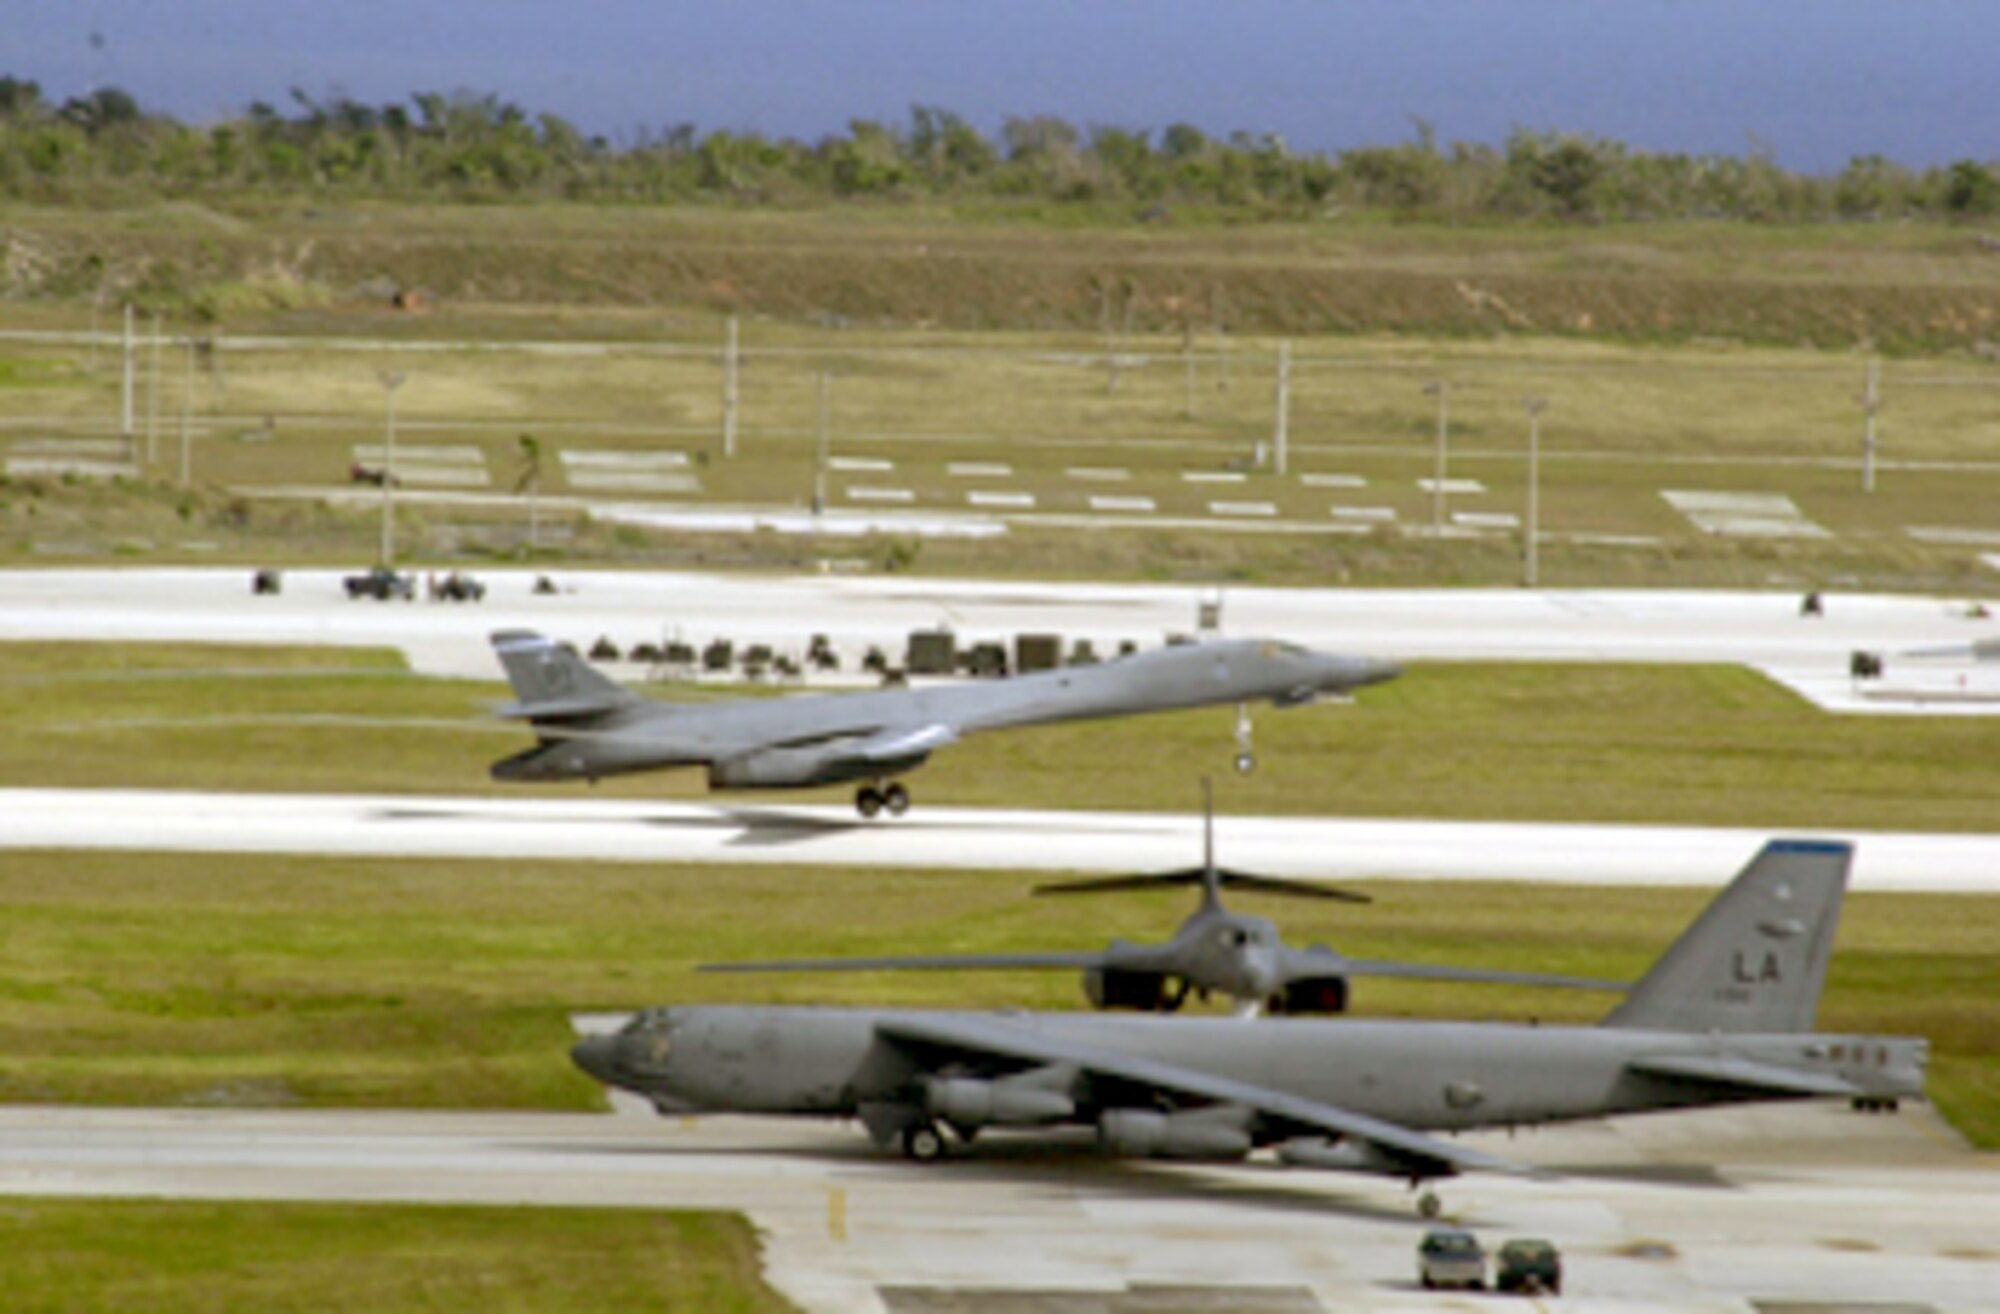 ANDERSEN AIR FORCE BASE, Guam -- A B-1B Lancer takes off as a B-52 Stratofortress taxies past, readying for take-off here during last day of surges April 2.  (U.S. Air Force photo by Staff Sgt. Charlene M. Franken)